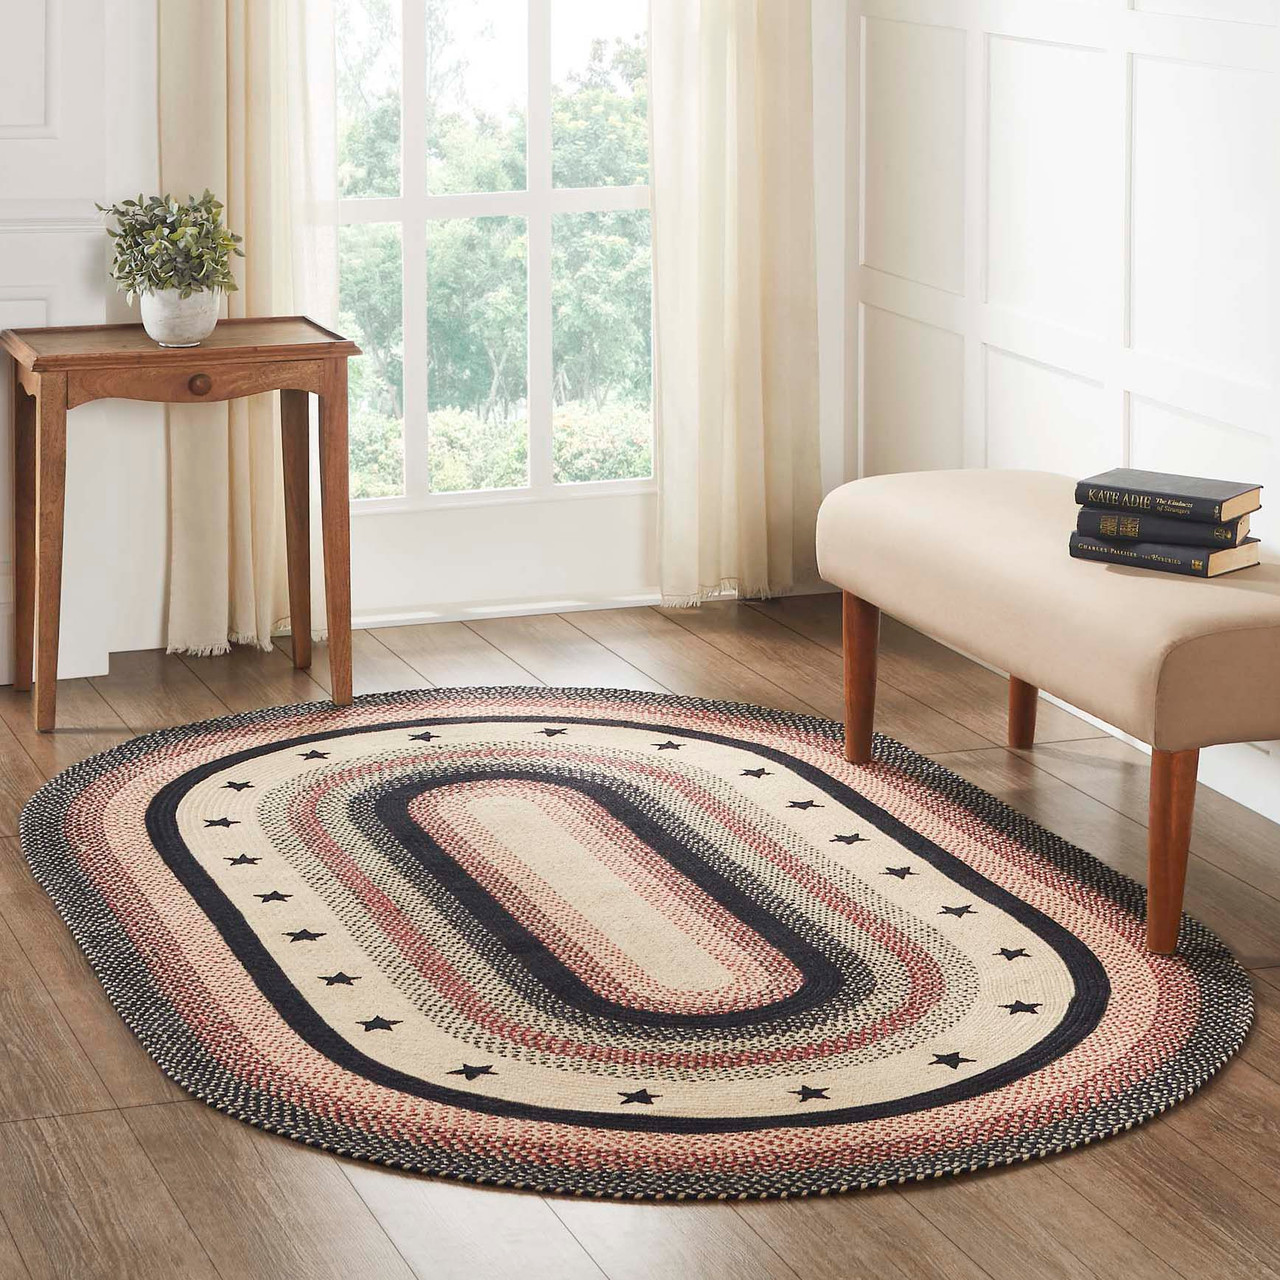 https://cdn11.bigcommerce.com/s-dwlxj/images/stencil/1280x1280/products/5271/12036/67009-vhc-brands-colonial-star-oval-braided-rug-jute-60x96-1__45351.1655333113.jpg?c=2